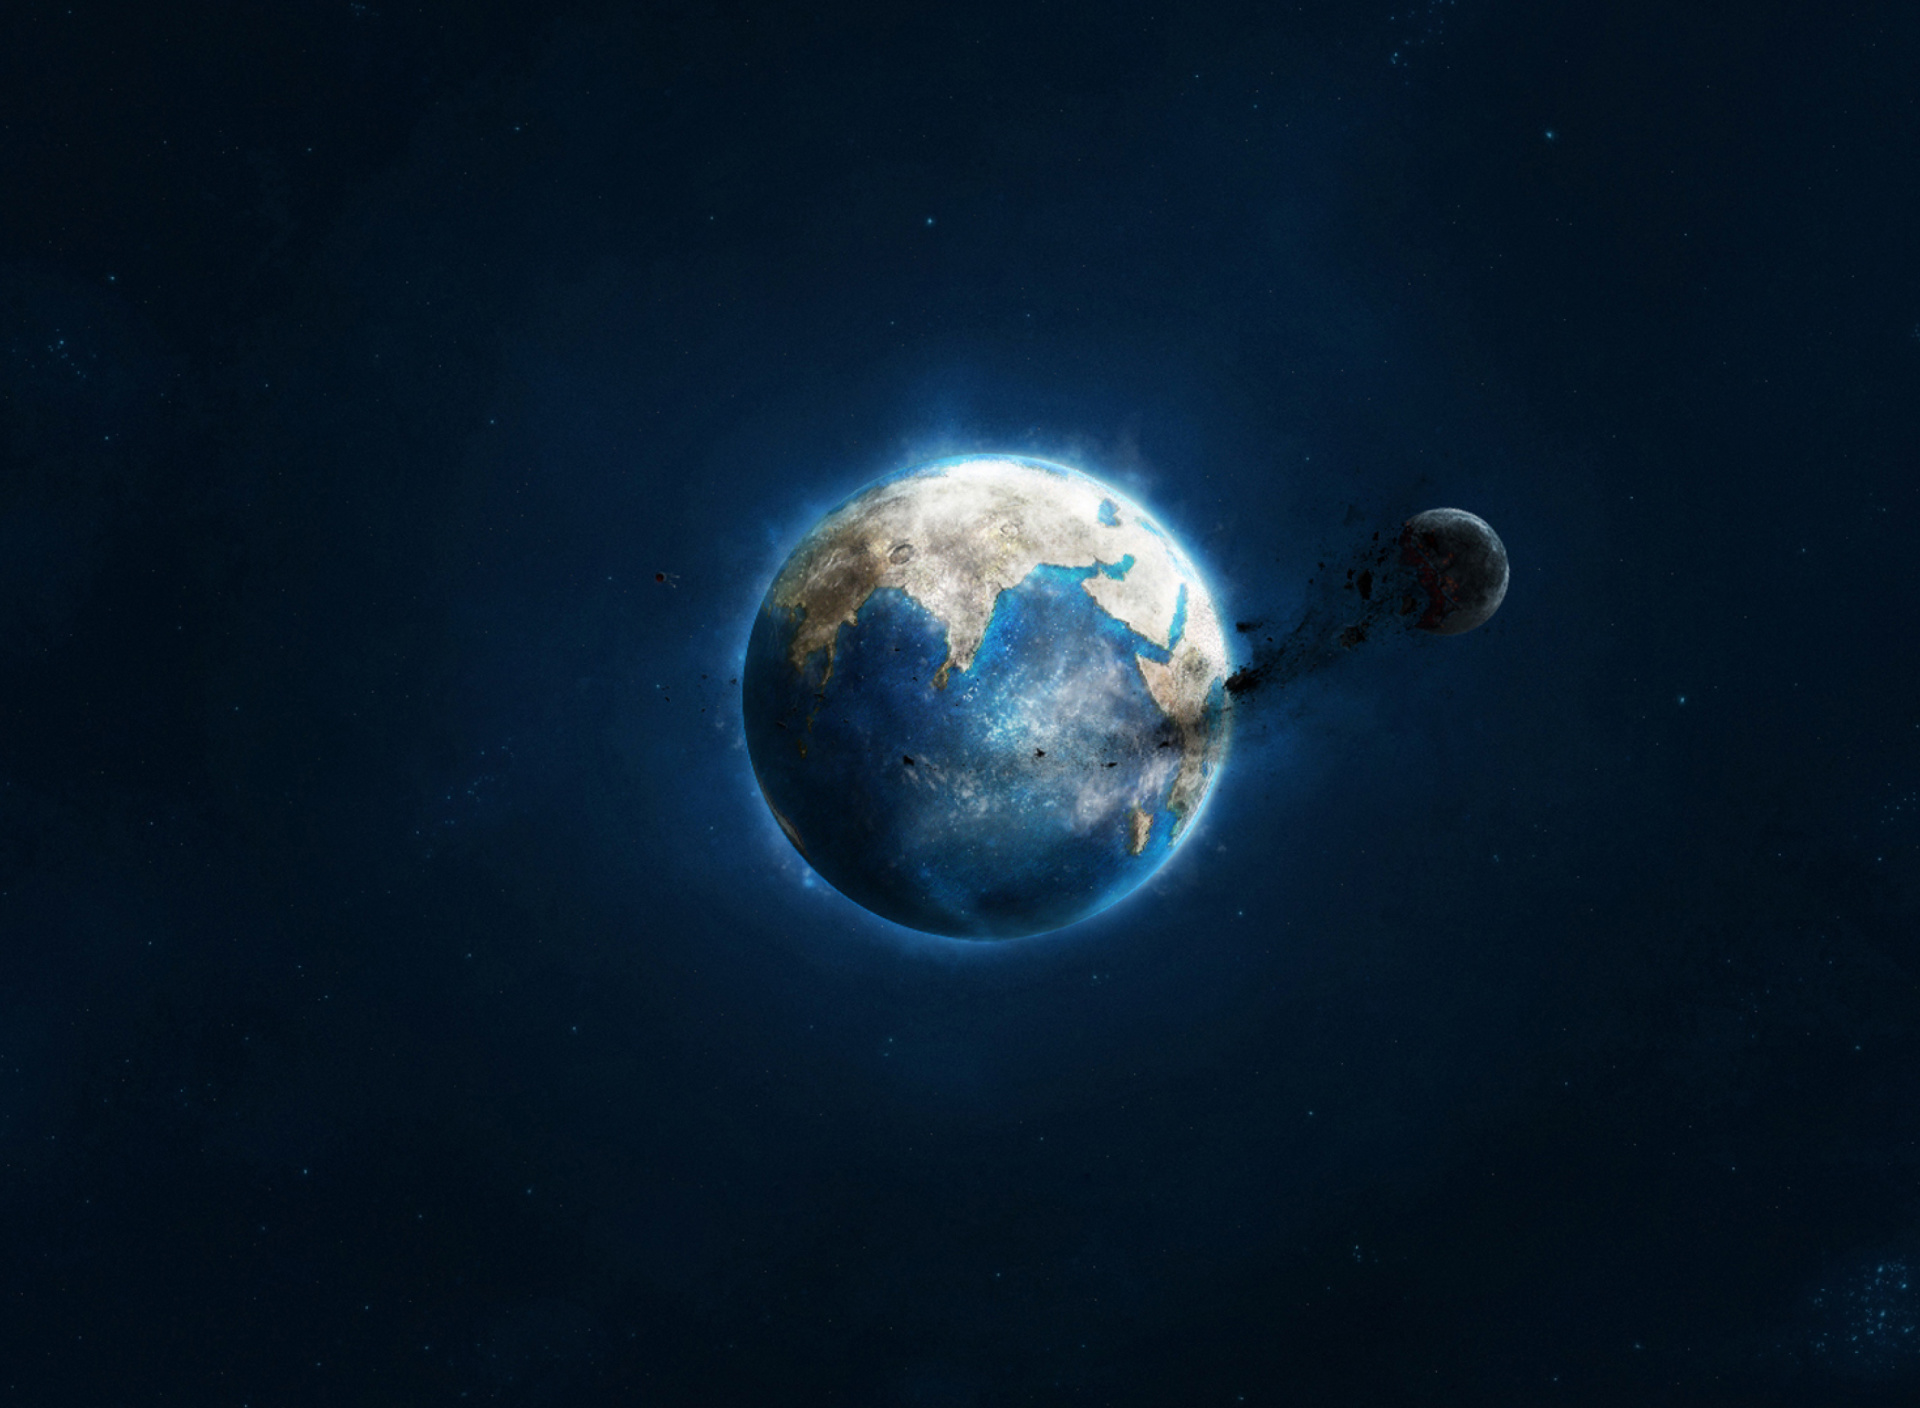 Planet and Asteroid wallpaper 1920x1408